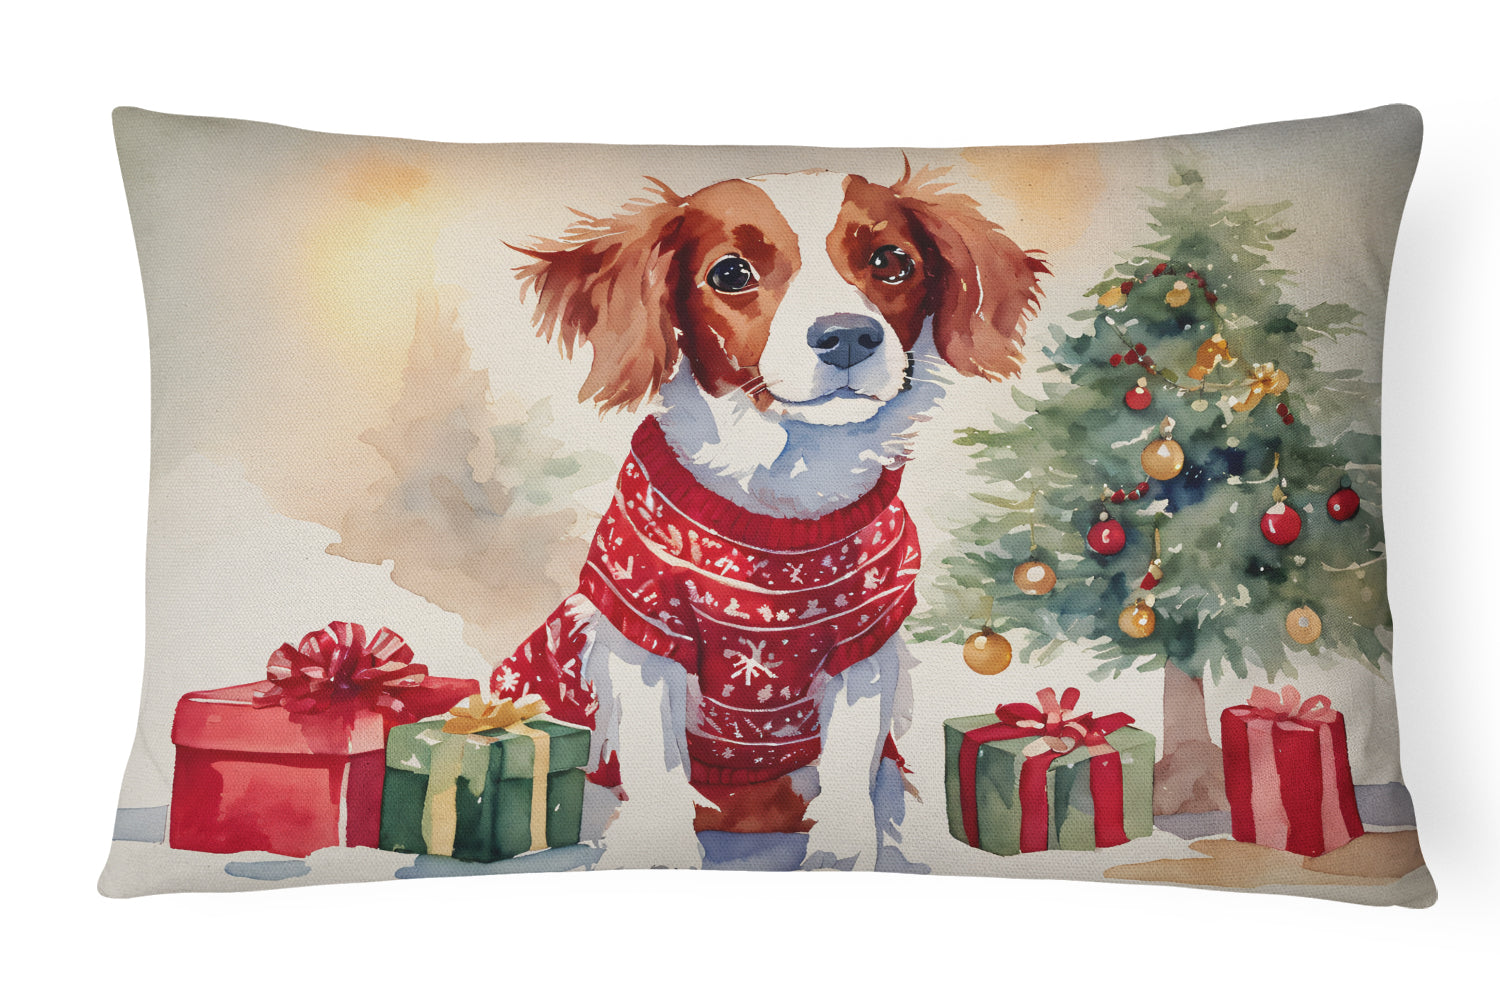 Buy this Brittany Spaniel Christmas Fabric Decorative Pillow